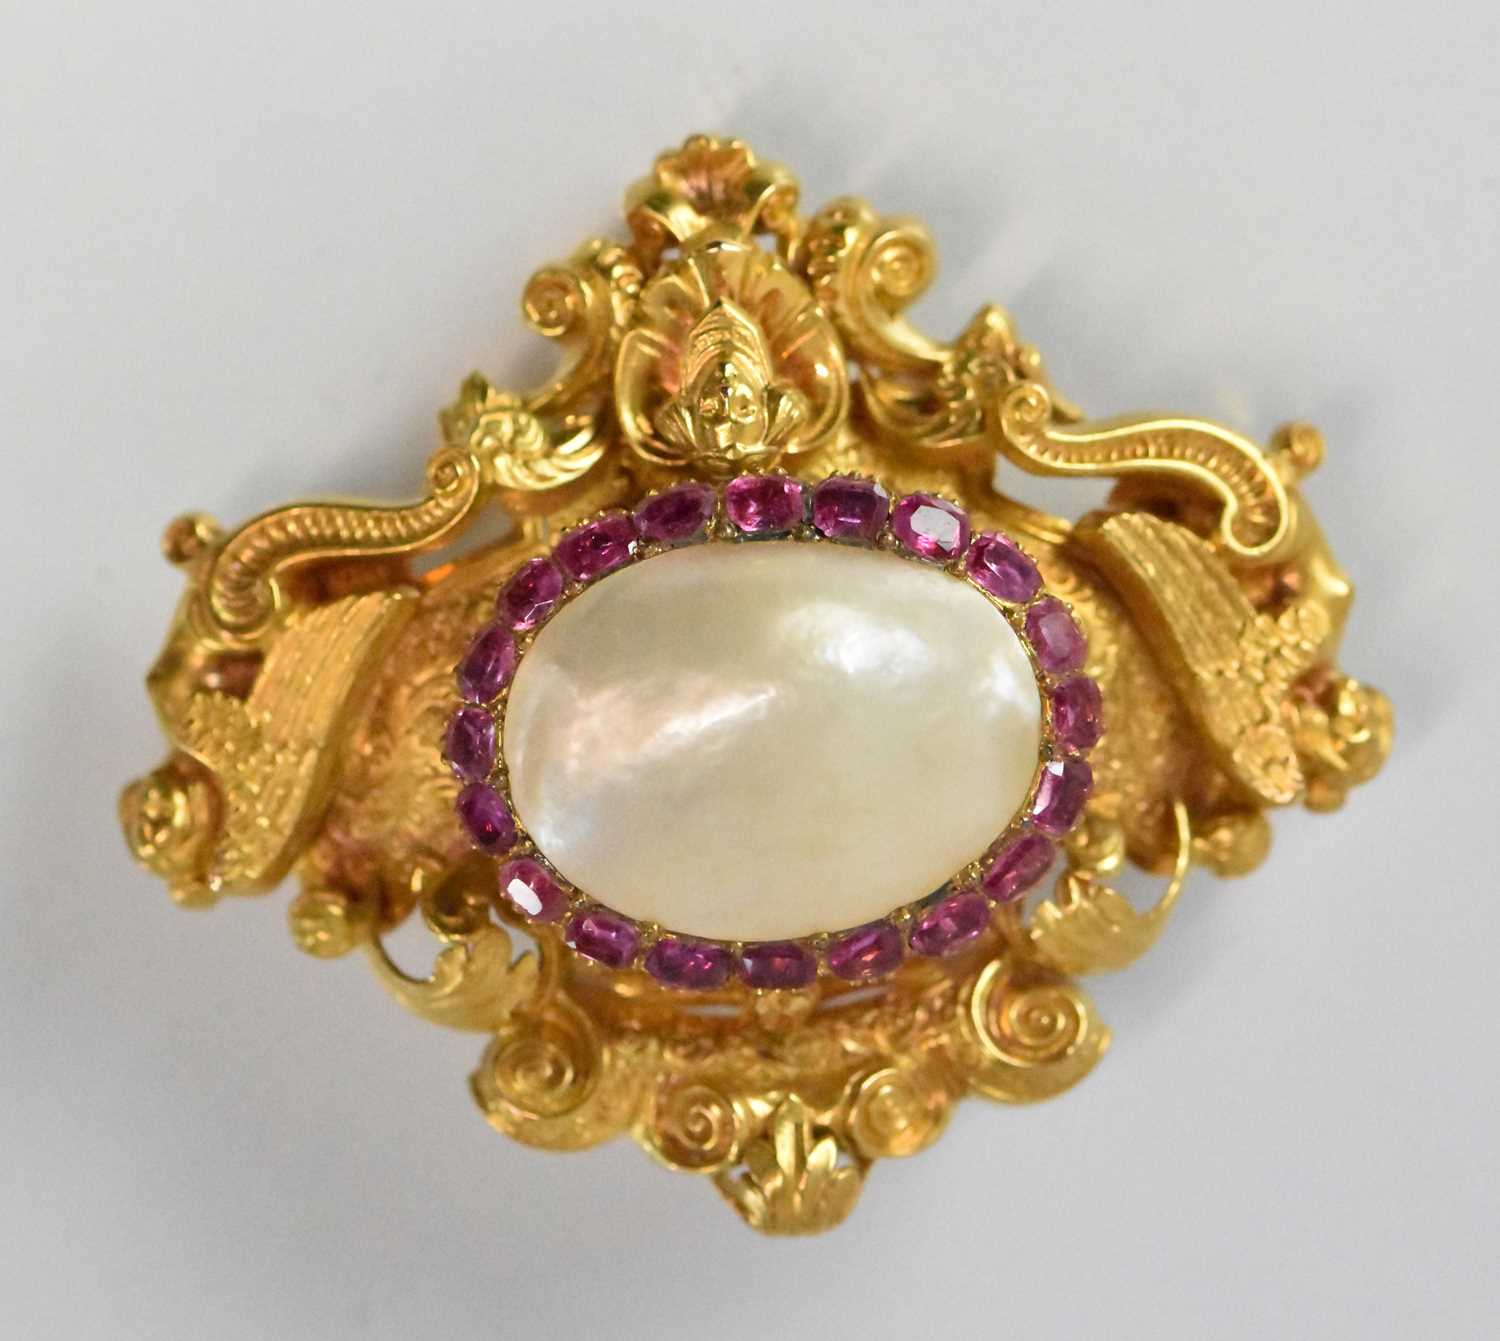 A fine Continental precious yellow metal brooch set with large central pearls surrounded by a border - Image 2 of 5